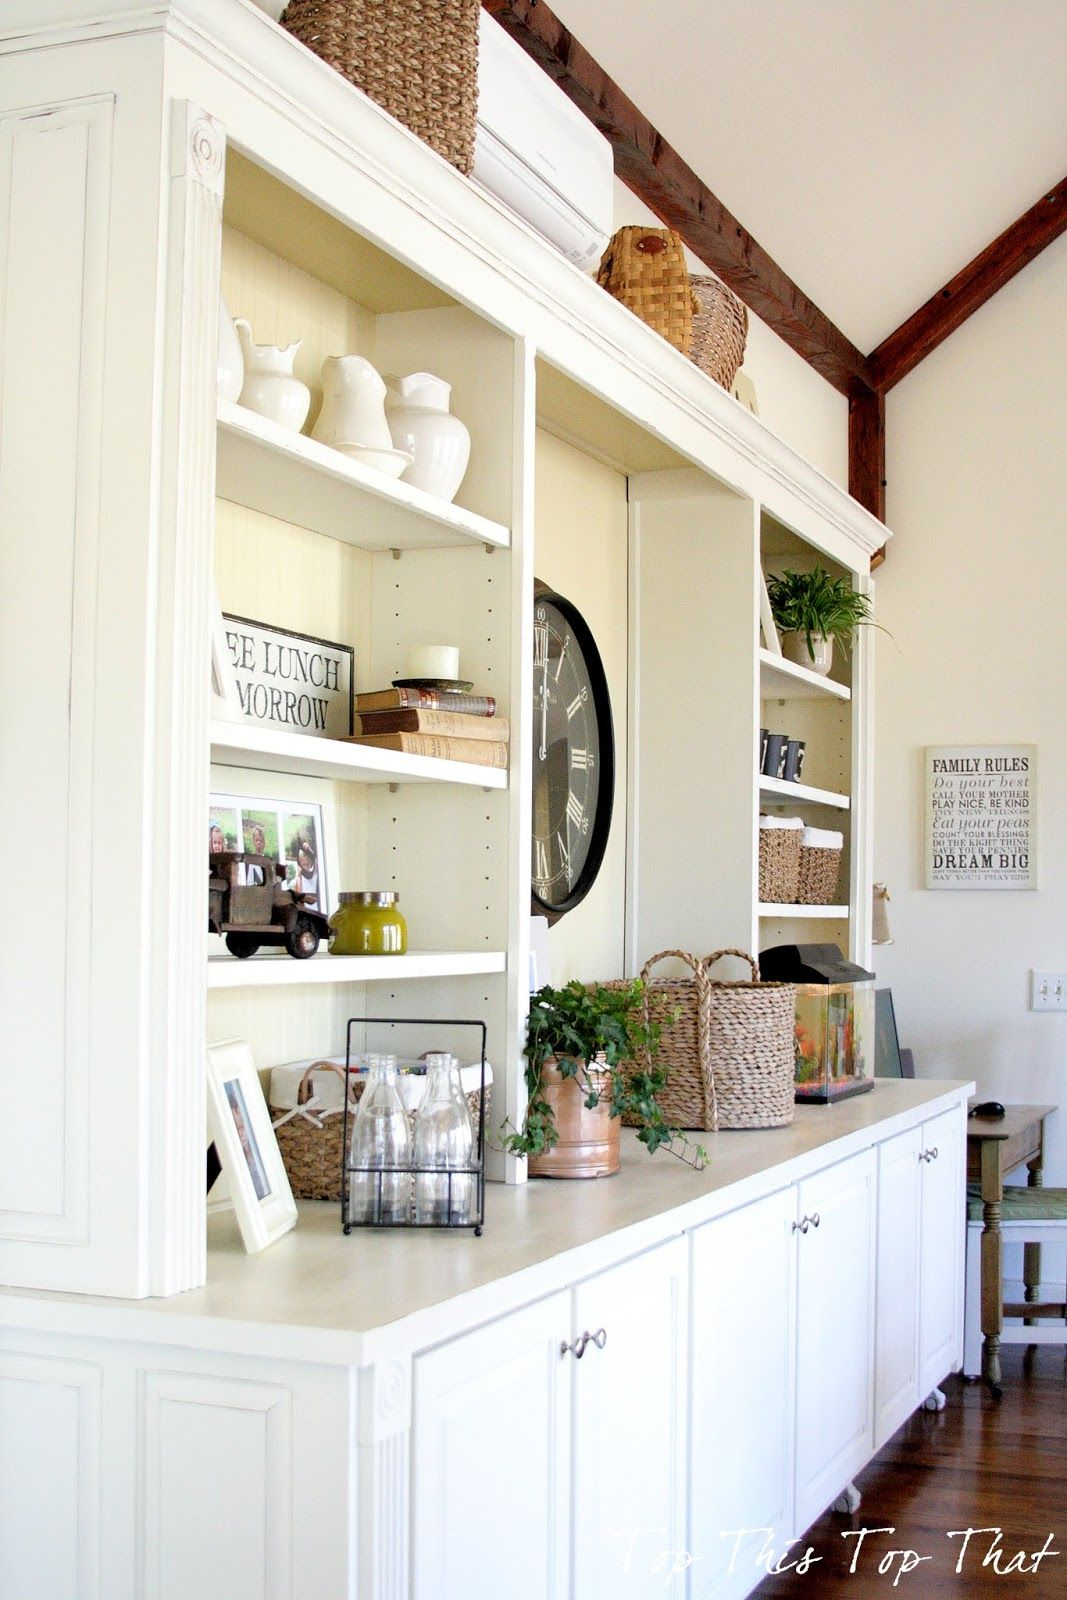 Painted Built In Shelving If This Is The Look You Want For regarding dimensions 1067 X 1600